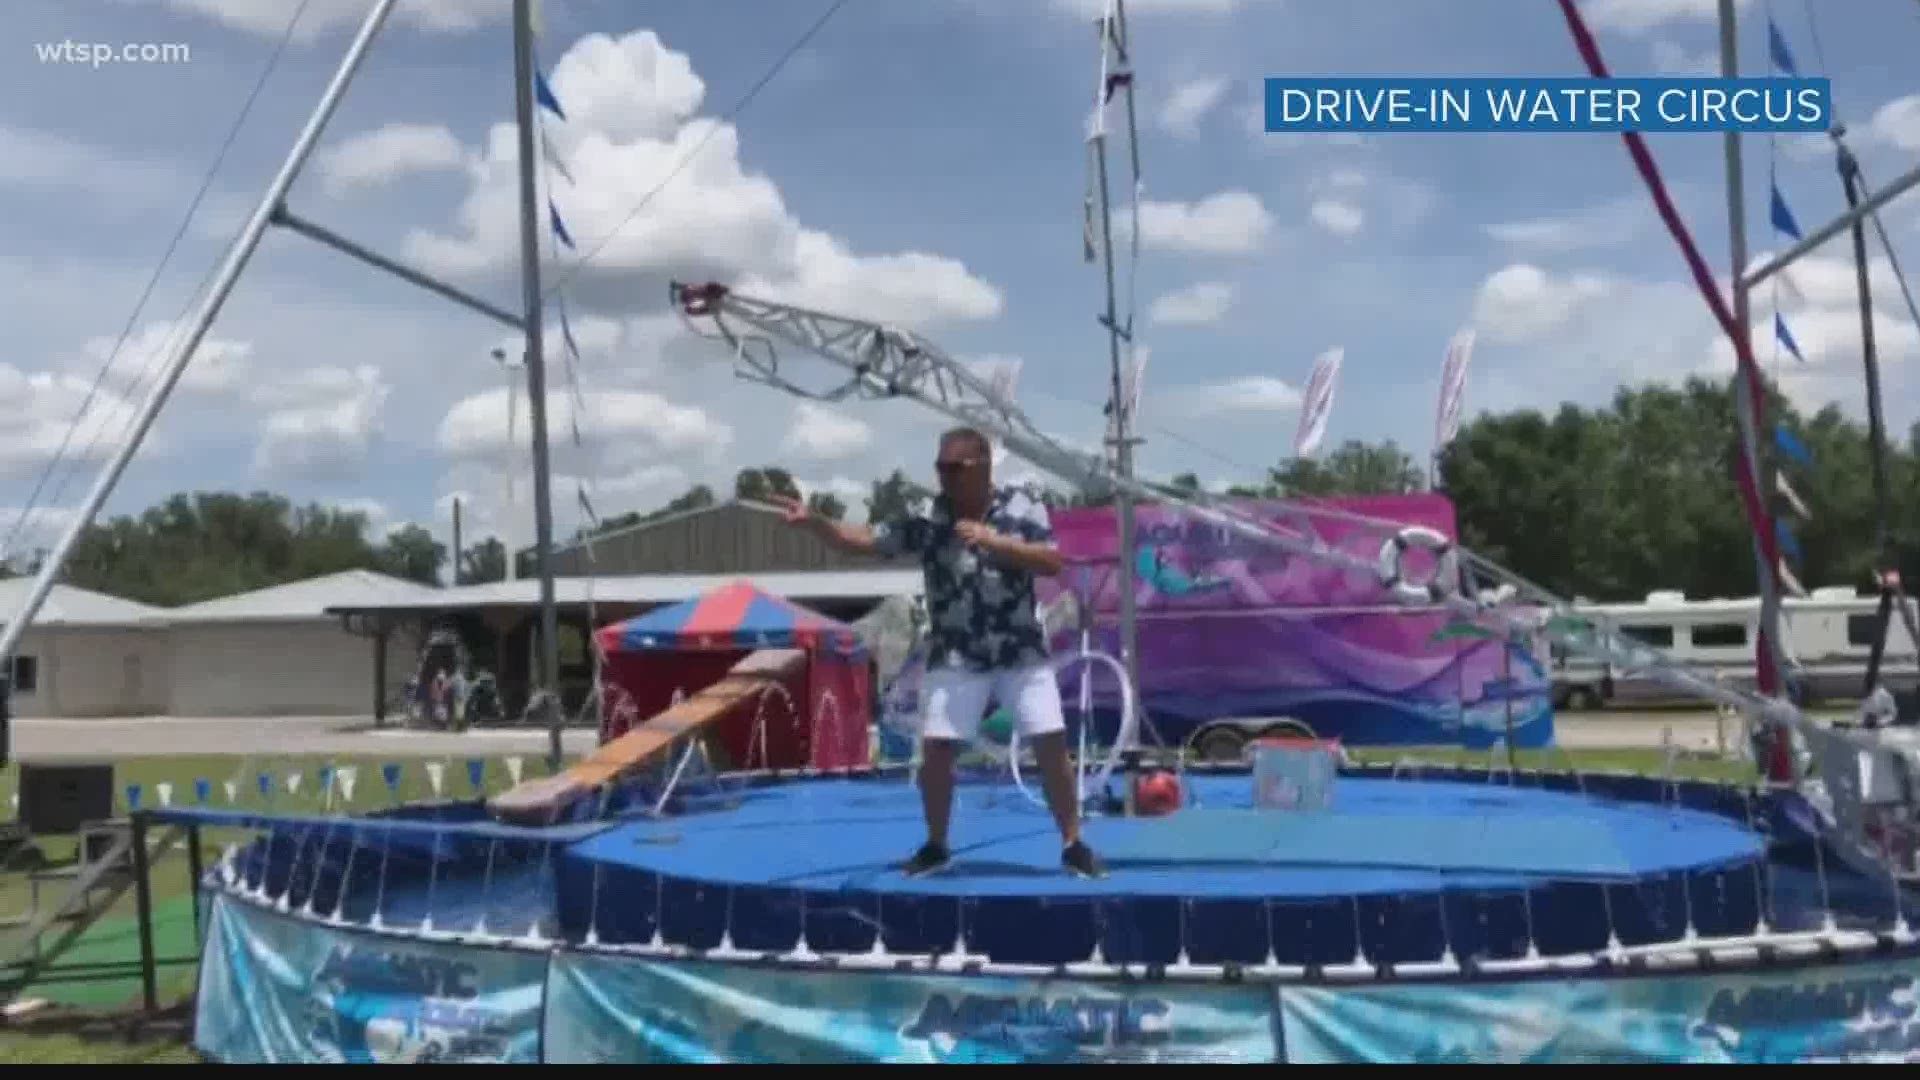 The Drive-In Water Circus has free admission June 4-14 at the Hillsborough County Fairgrounds.